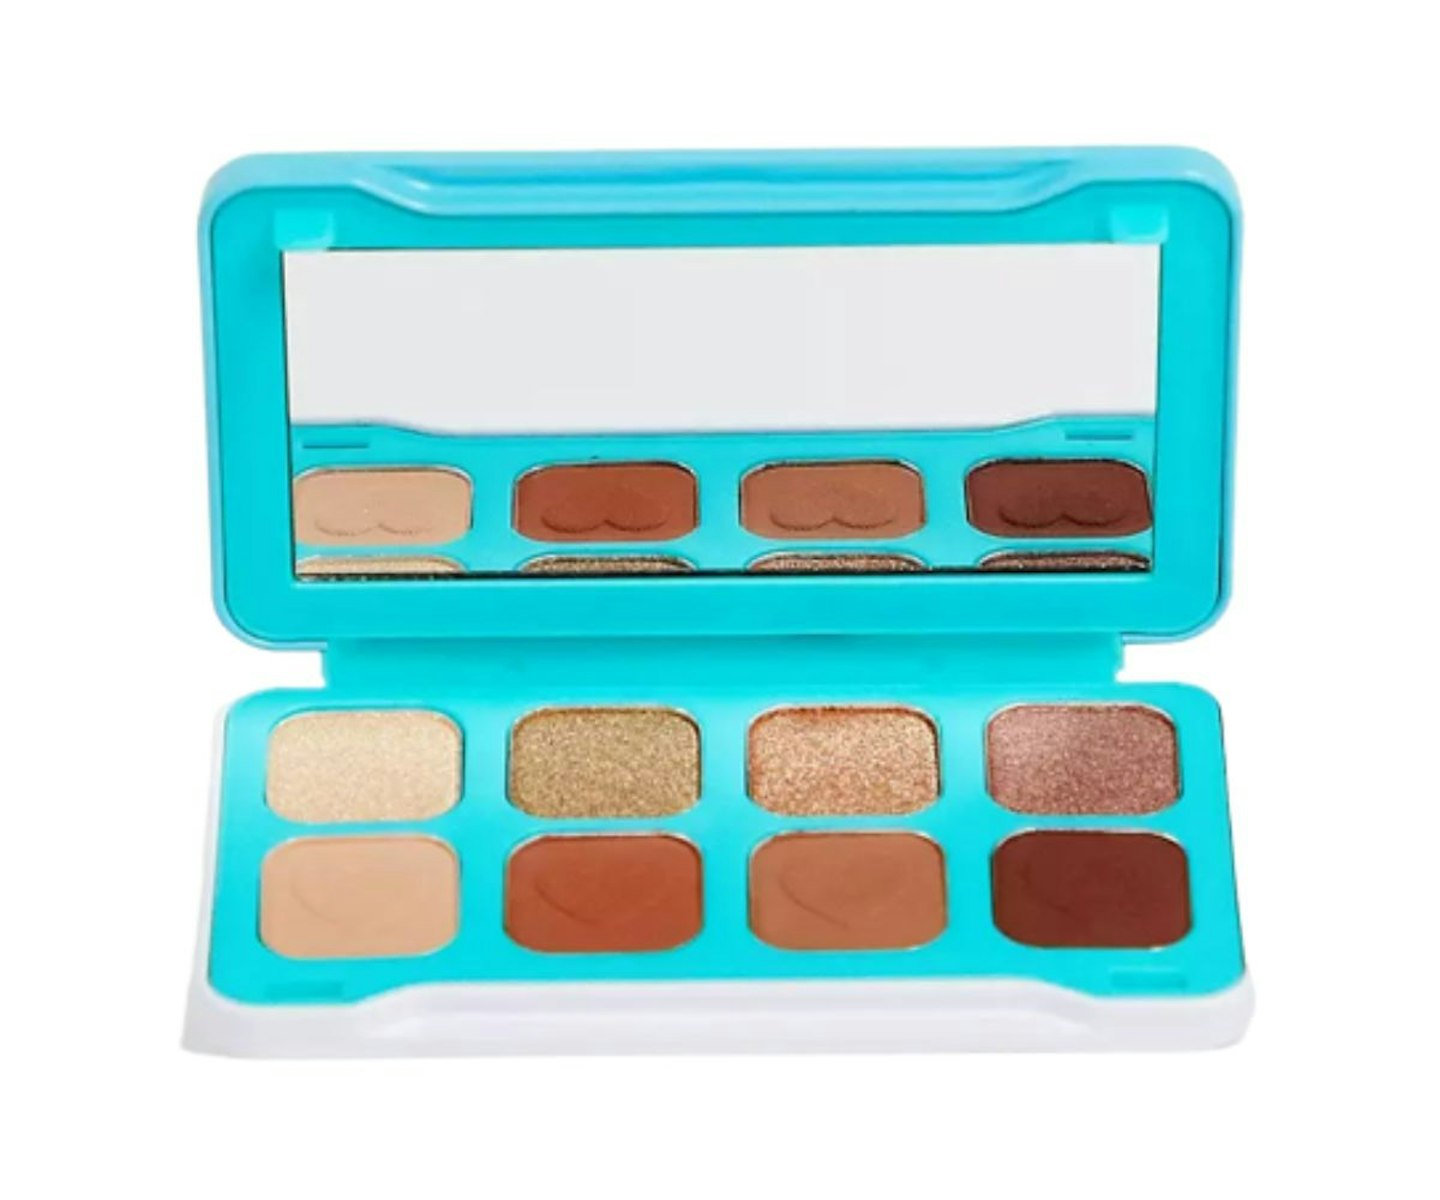 Revolution x Love Island Dynamic Palette - Go For a Chat